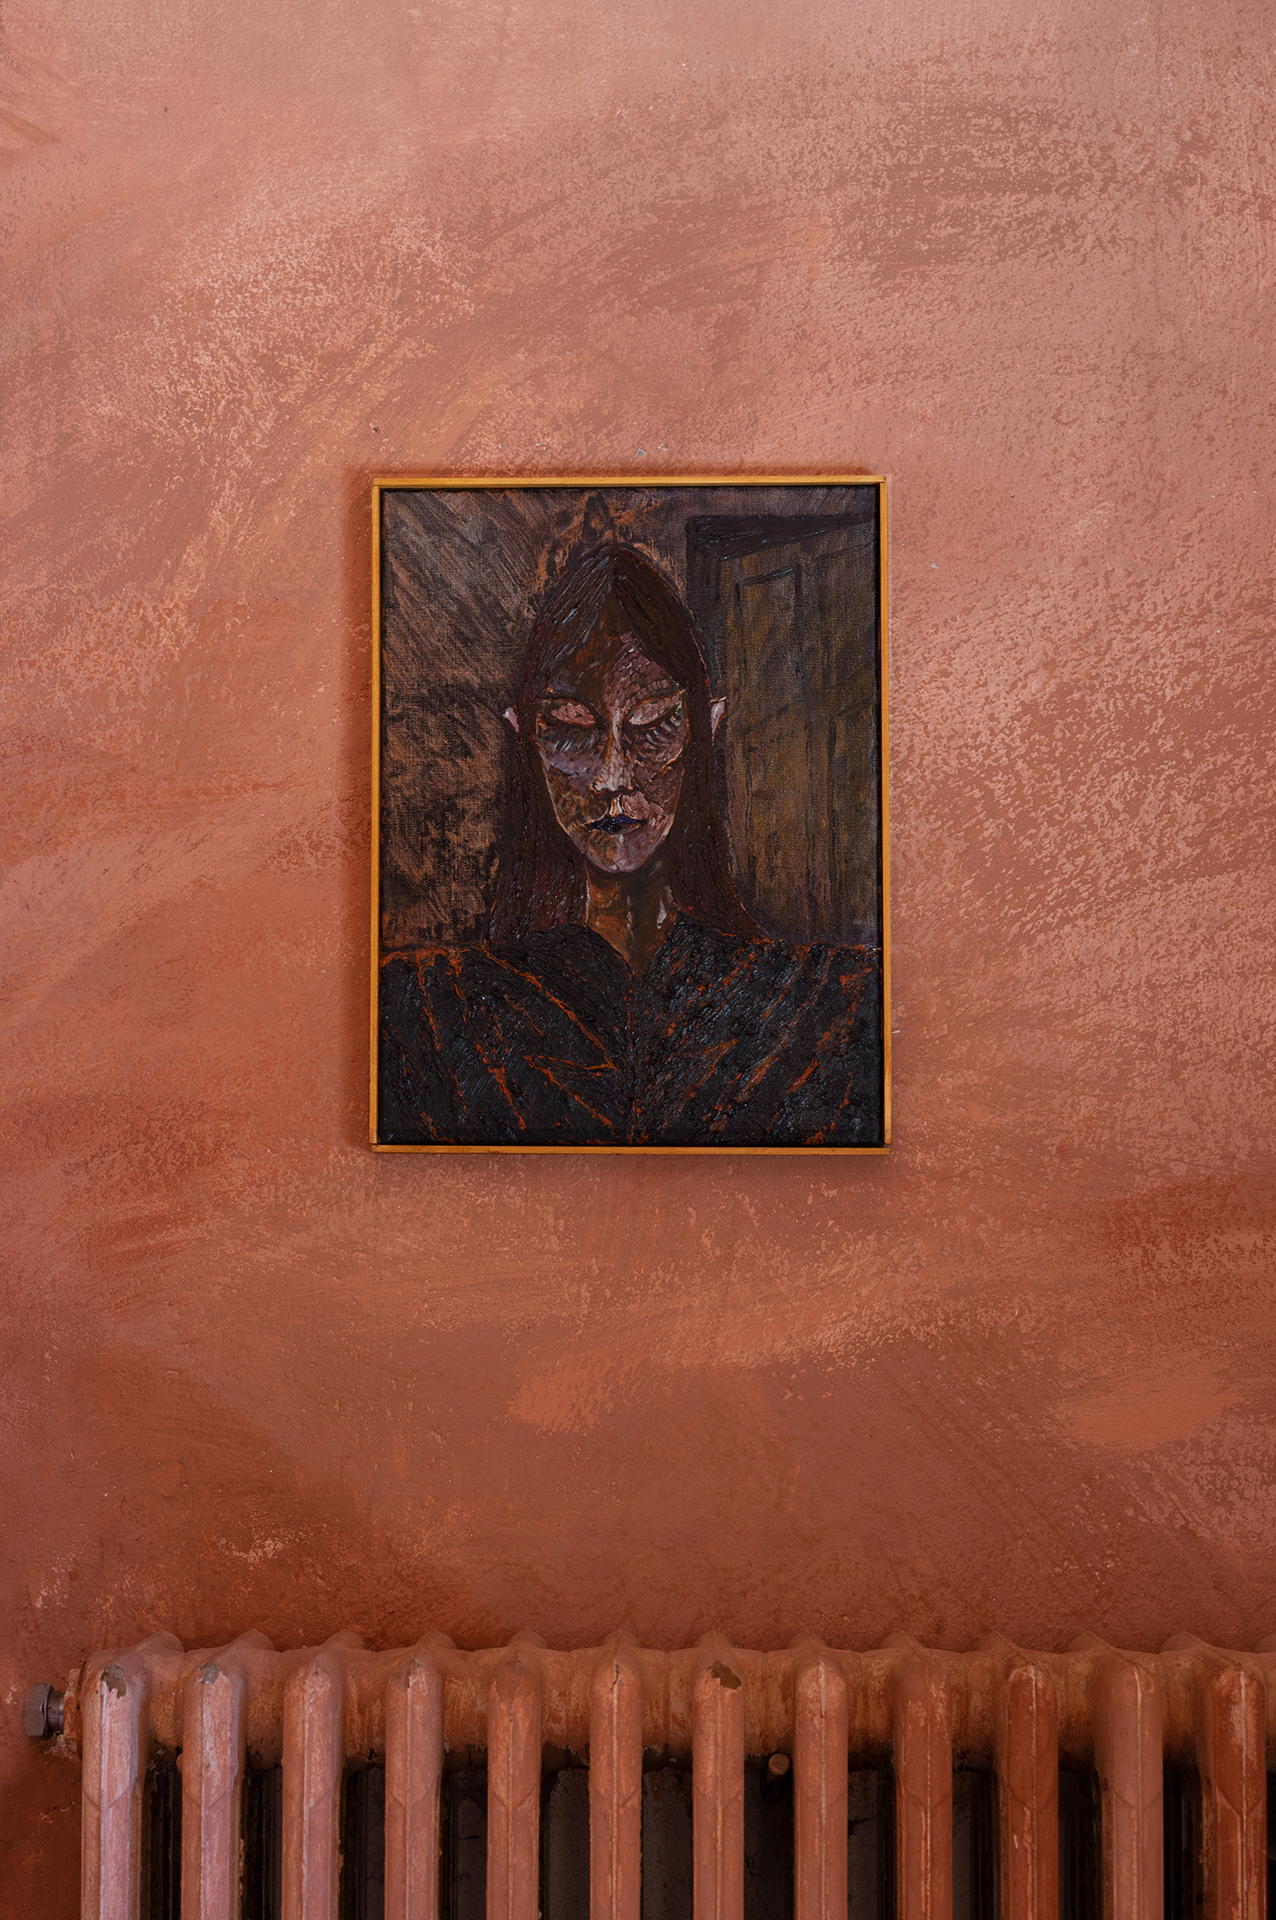 Stevie Dix, "Looking Down", 2022 (Oil and beeswax on canvas on board, hardwood frame, 41 x 31 cm).